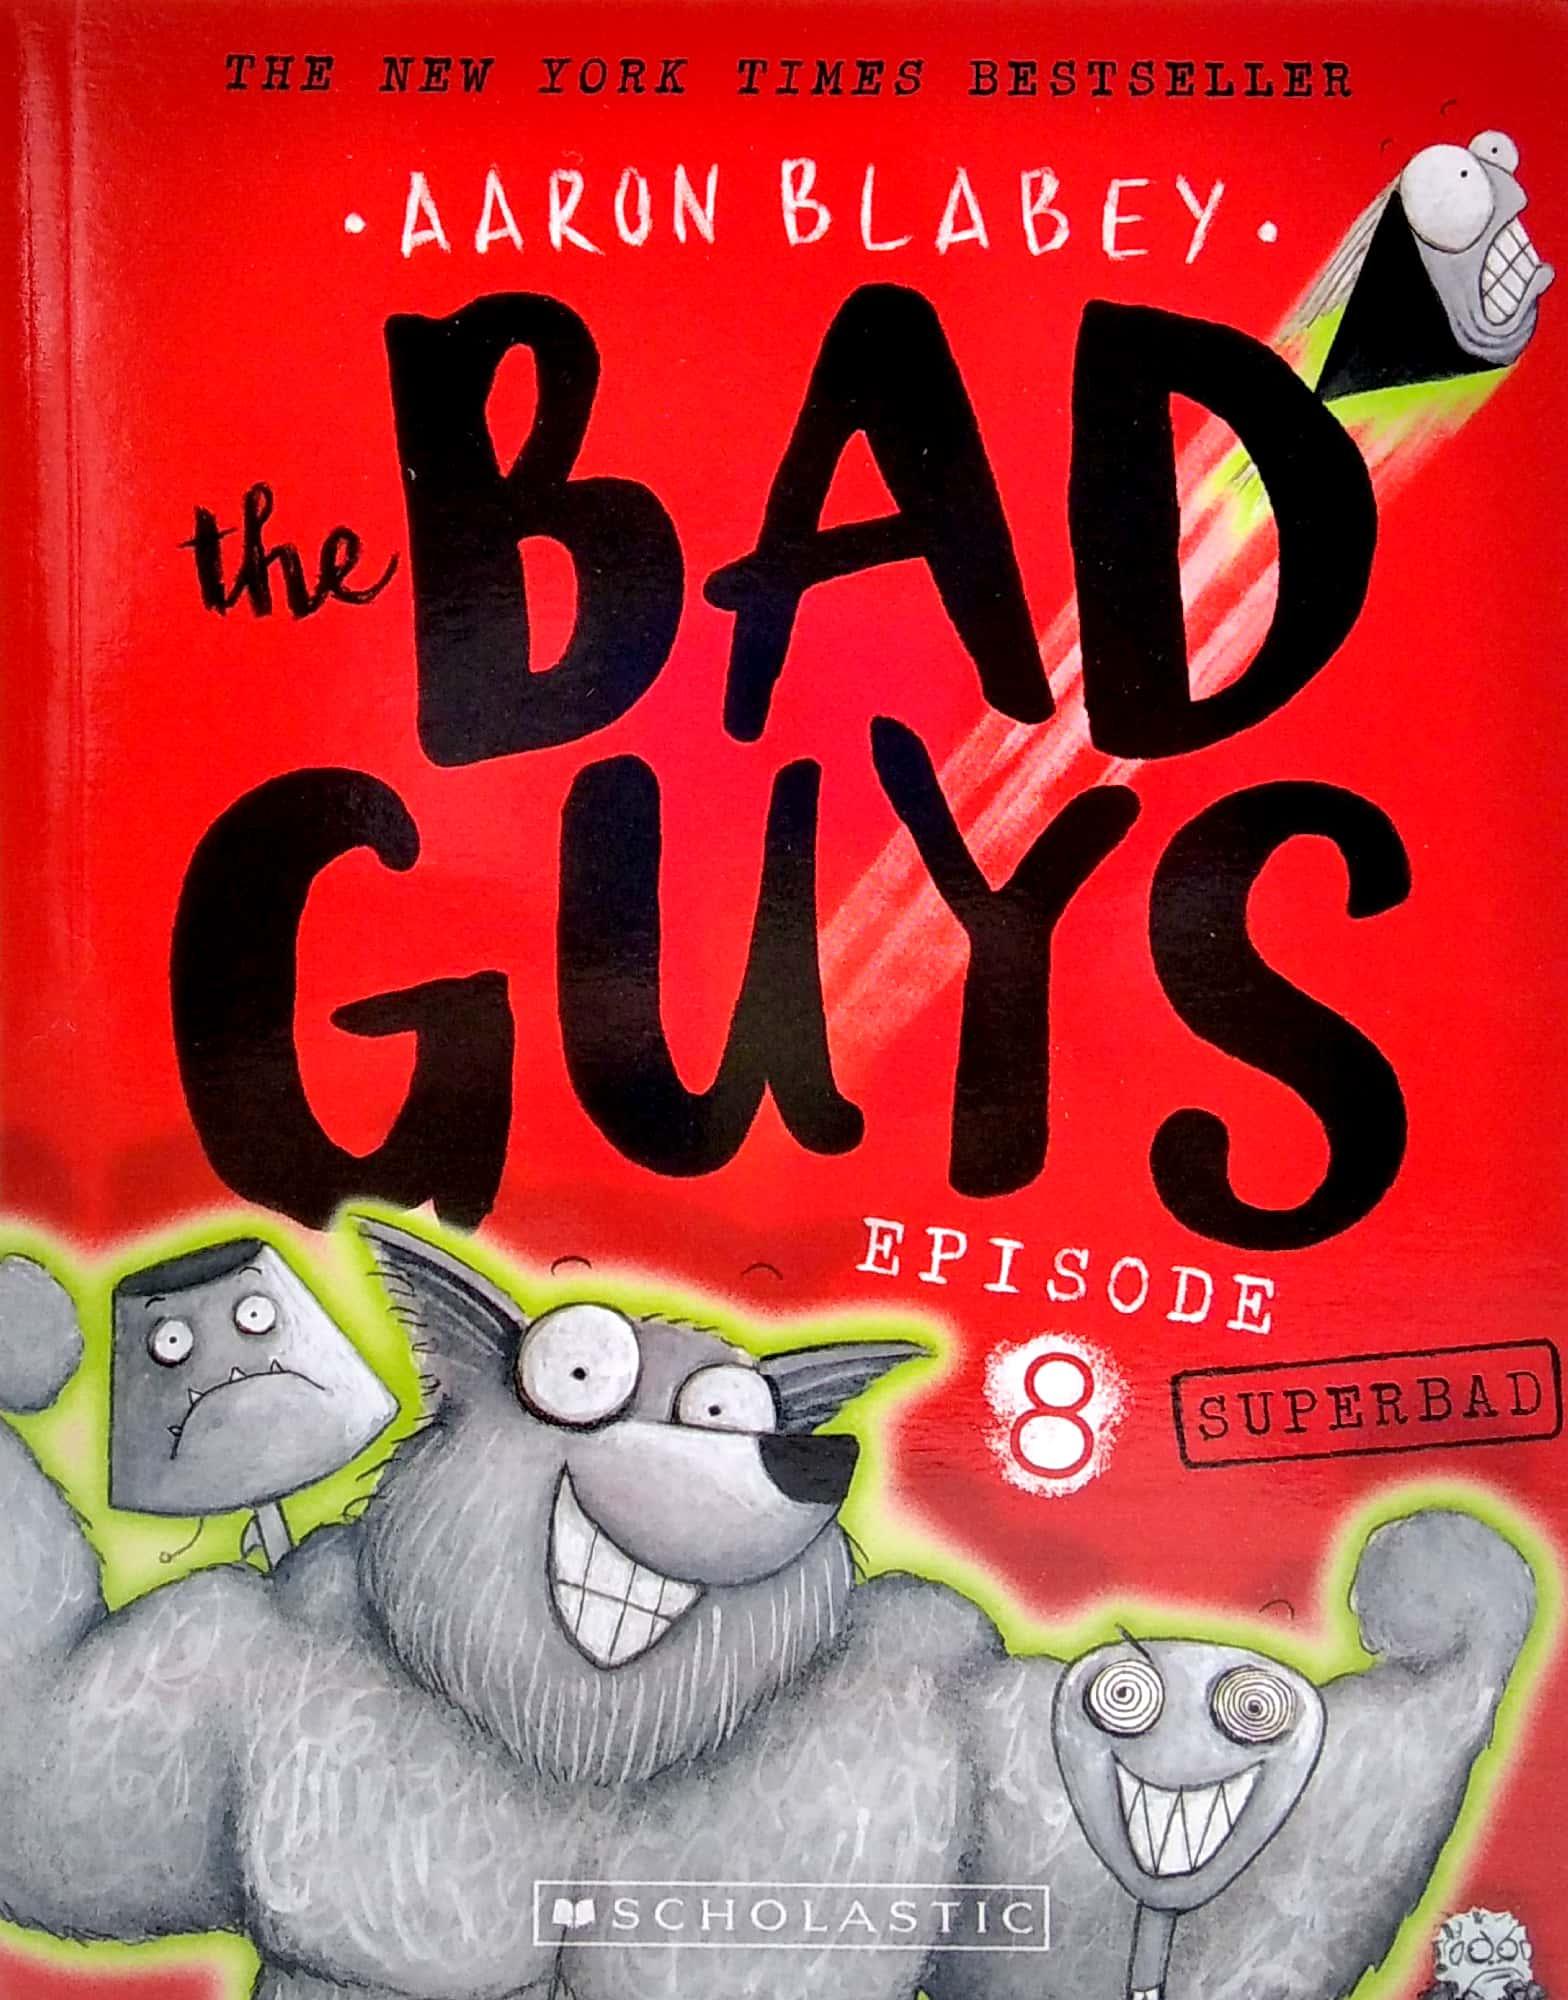 The Bad Guys - Episode 8: Superbad